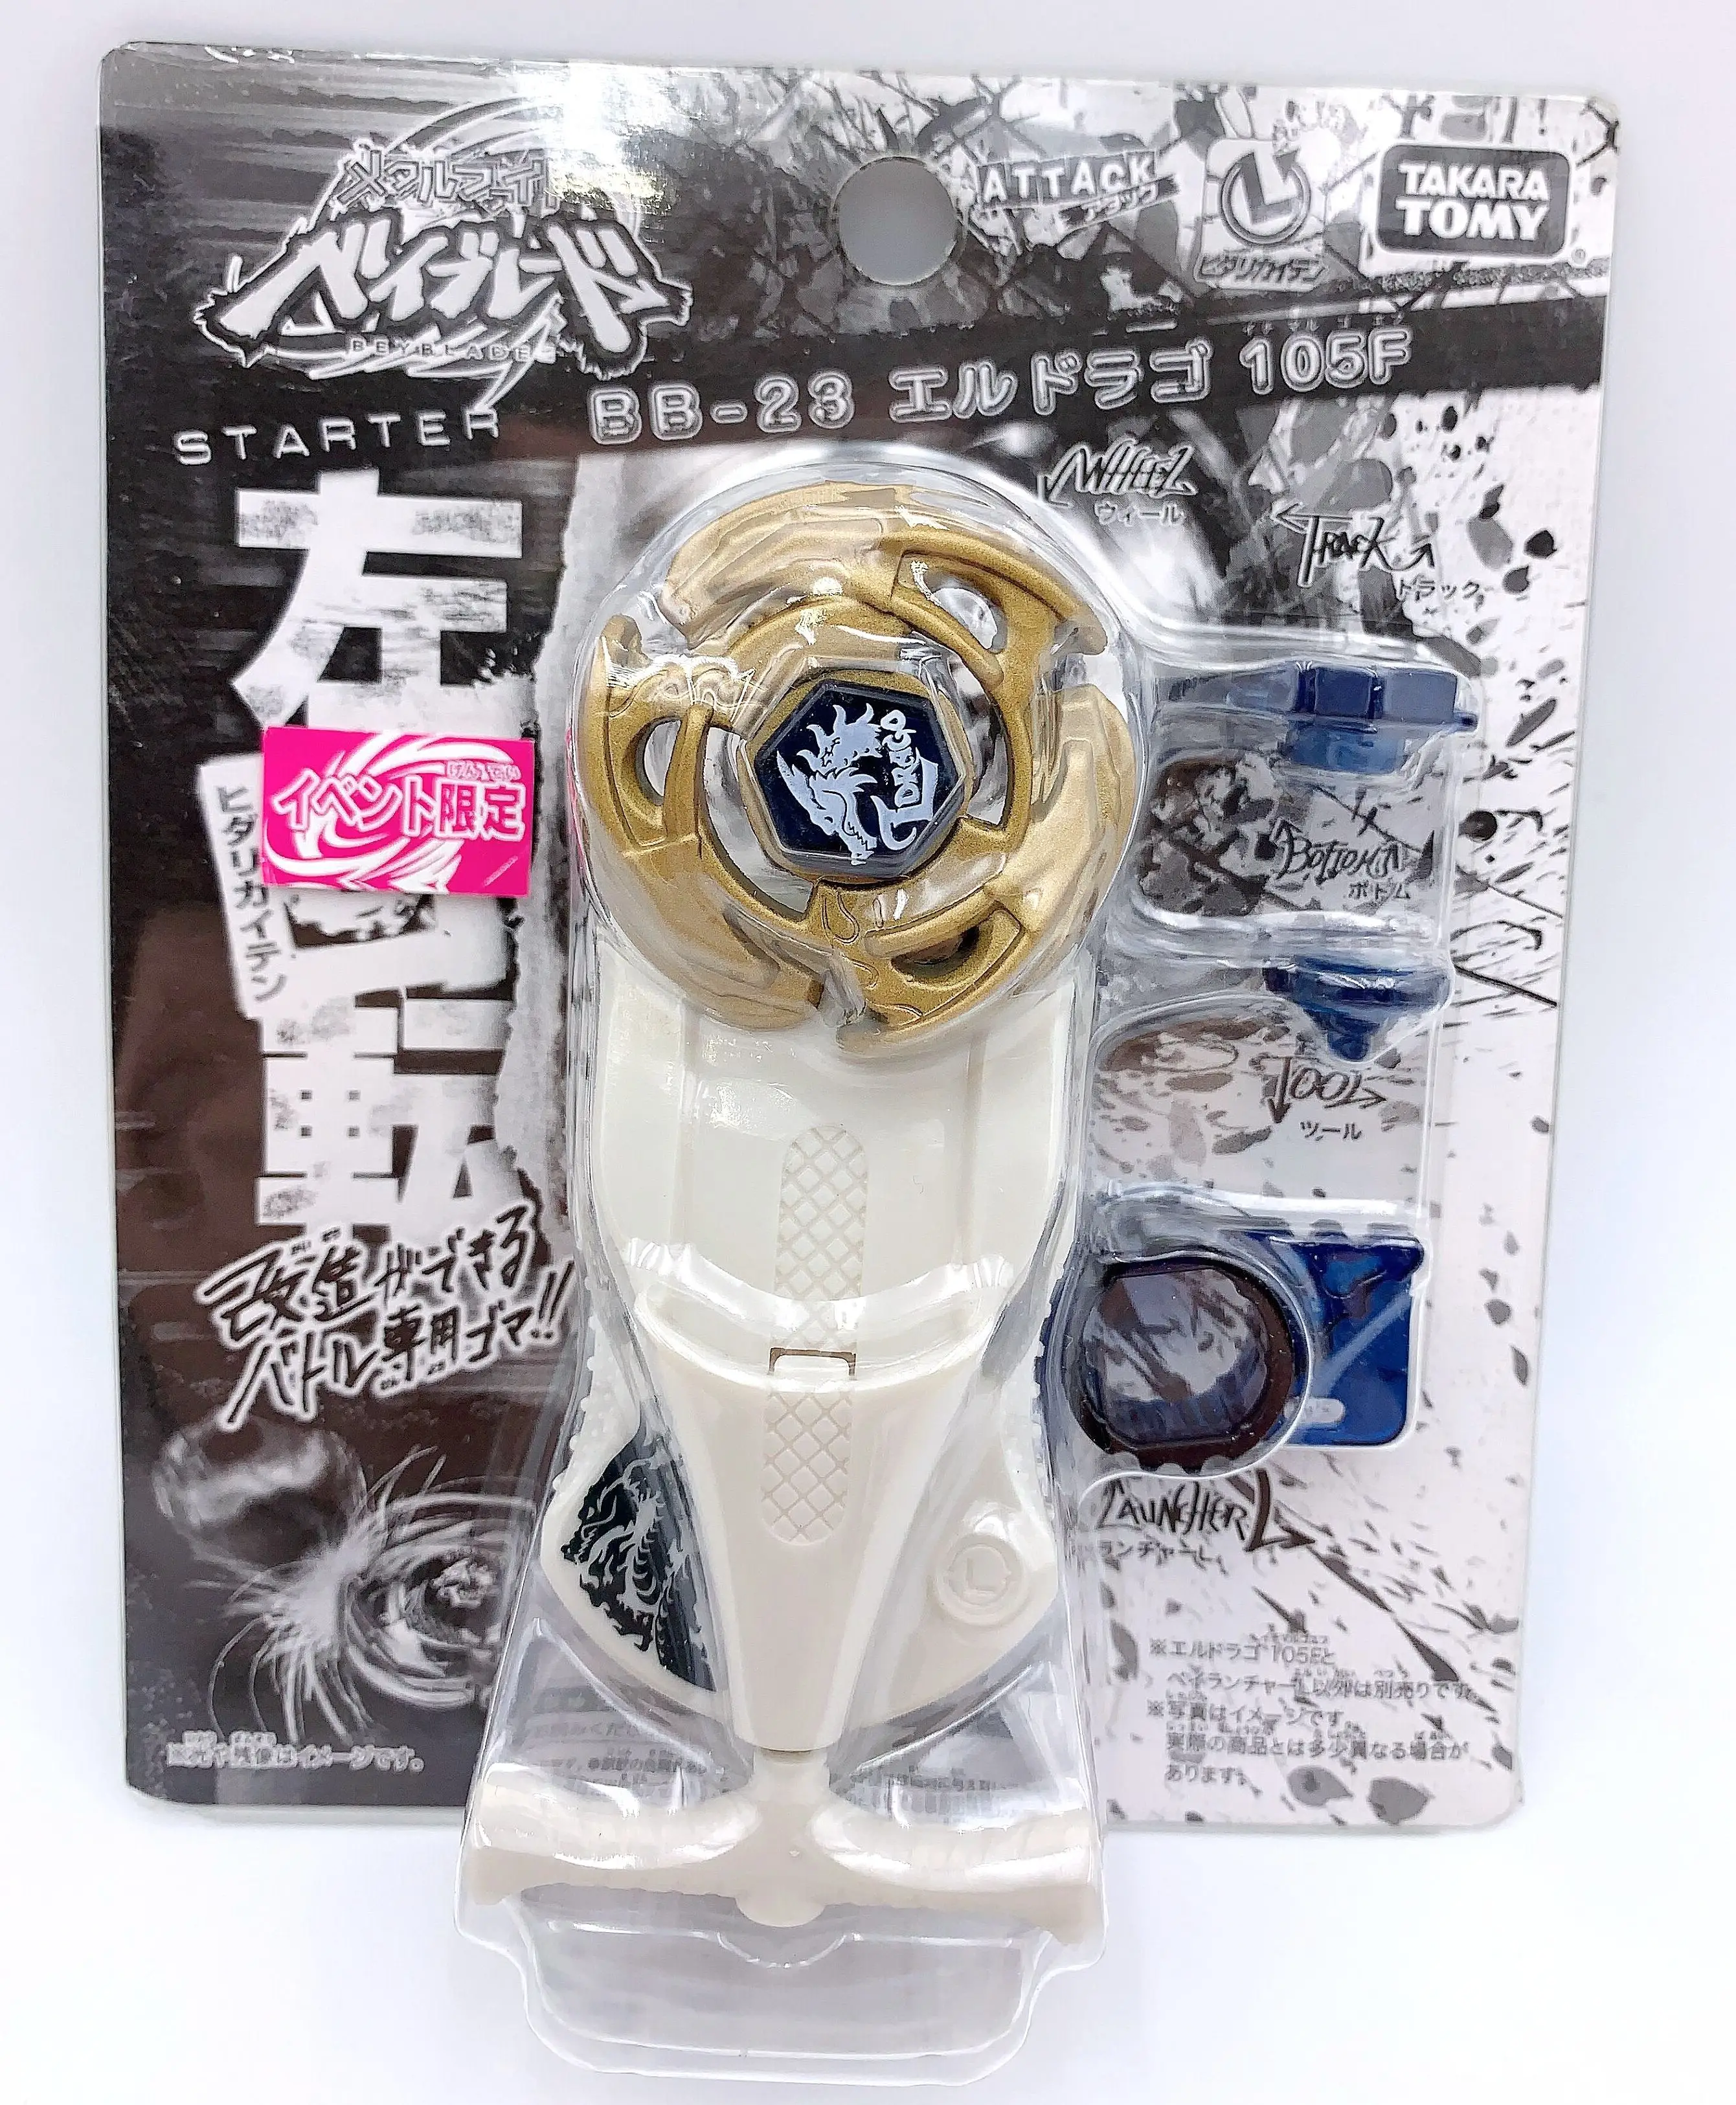 

TAKARA TOMY JAPAN BEYBLADE BB-23 WBBA Limited Gold L Drago 105F+STRING LAUNCHER AS KIDS TOYS